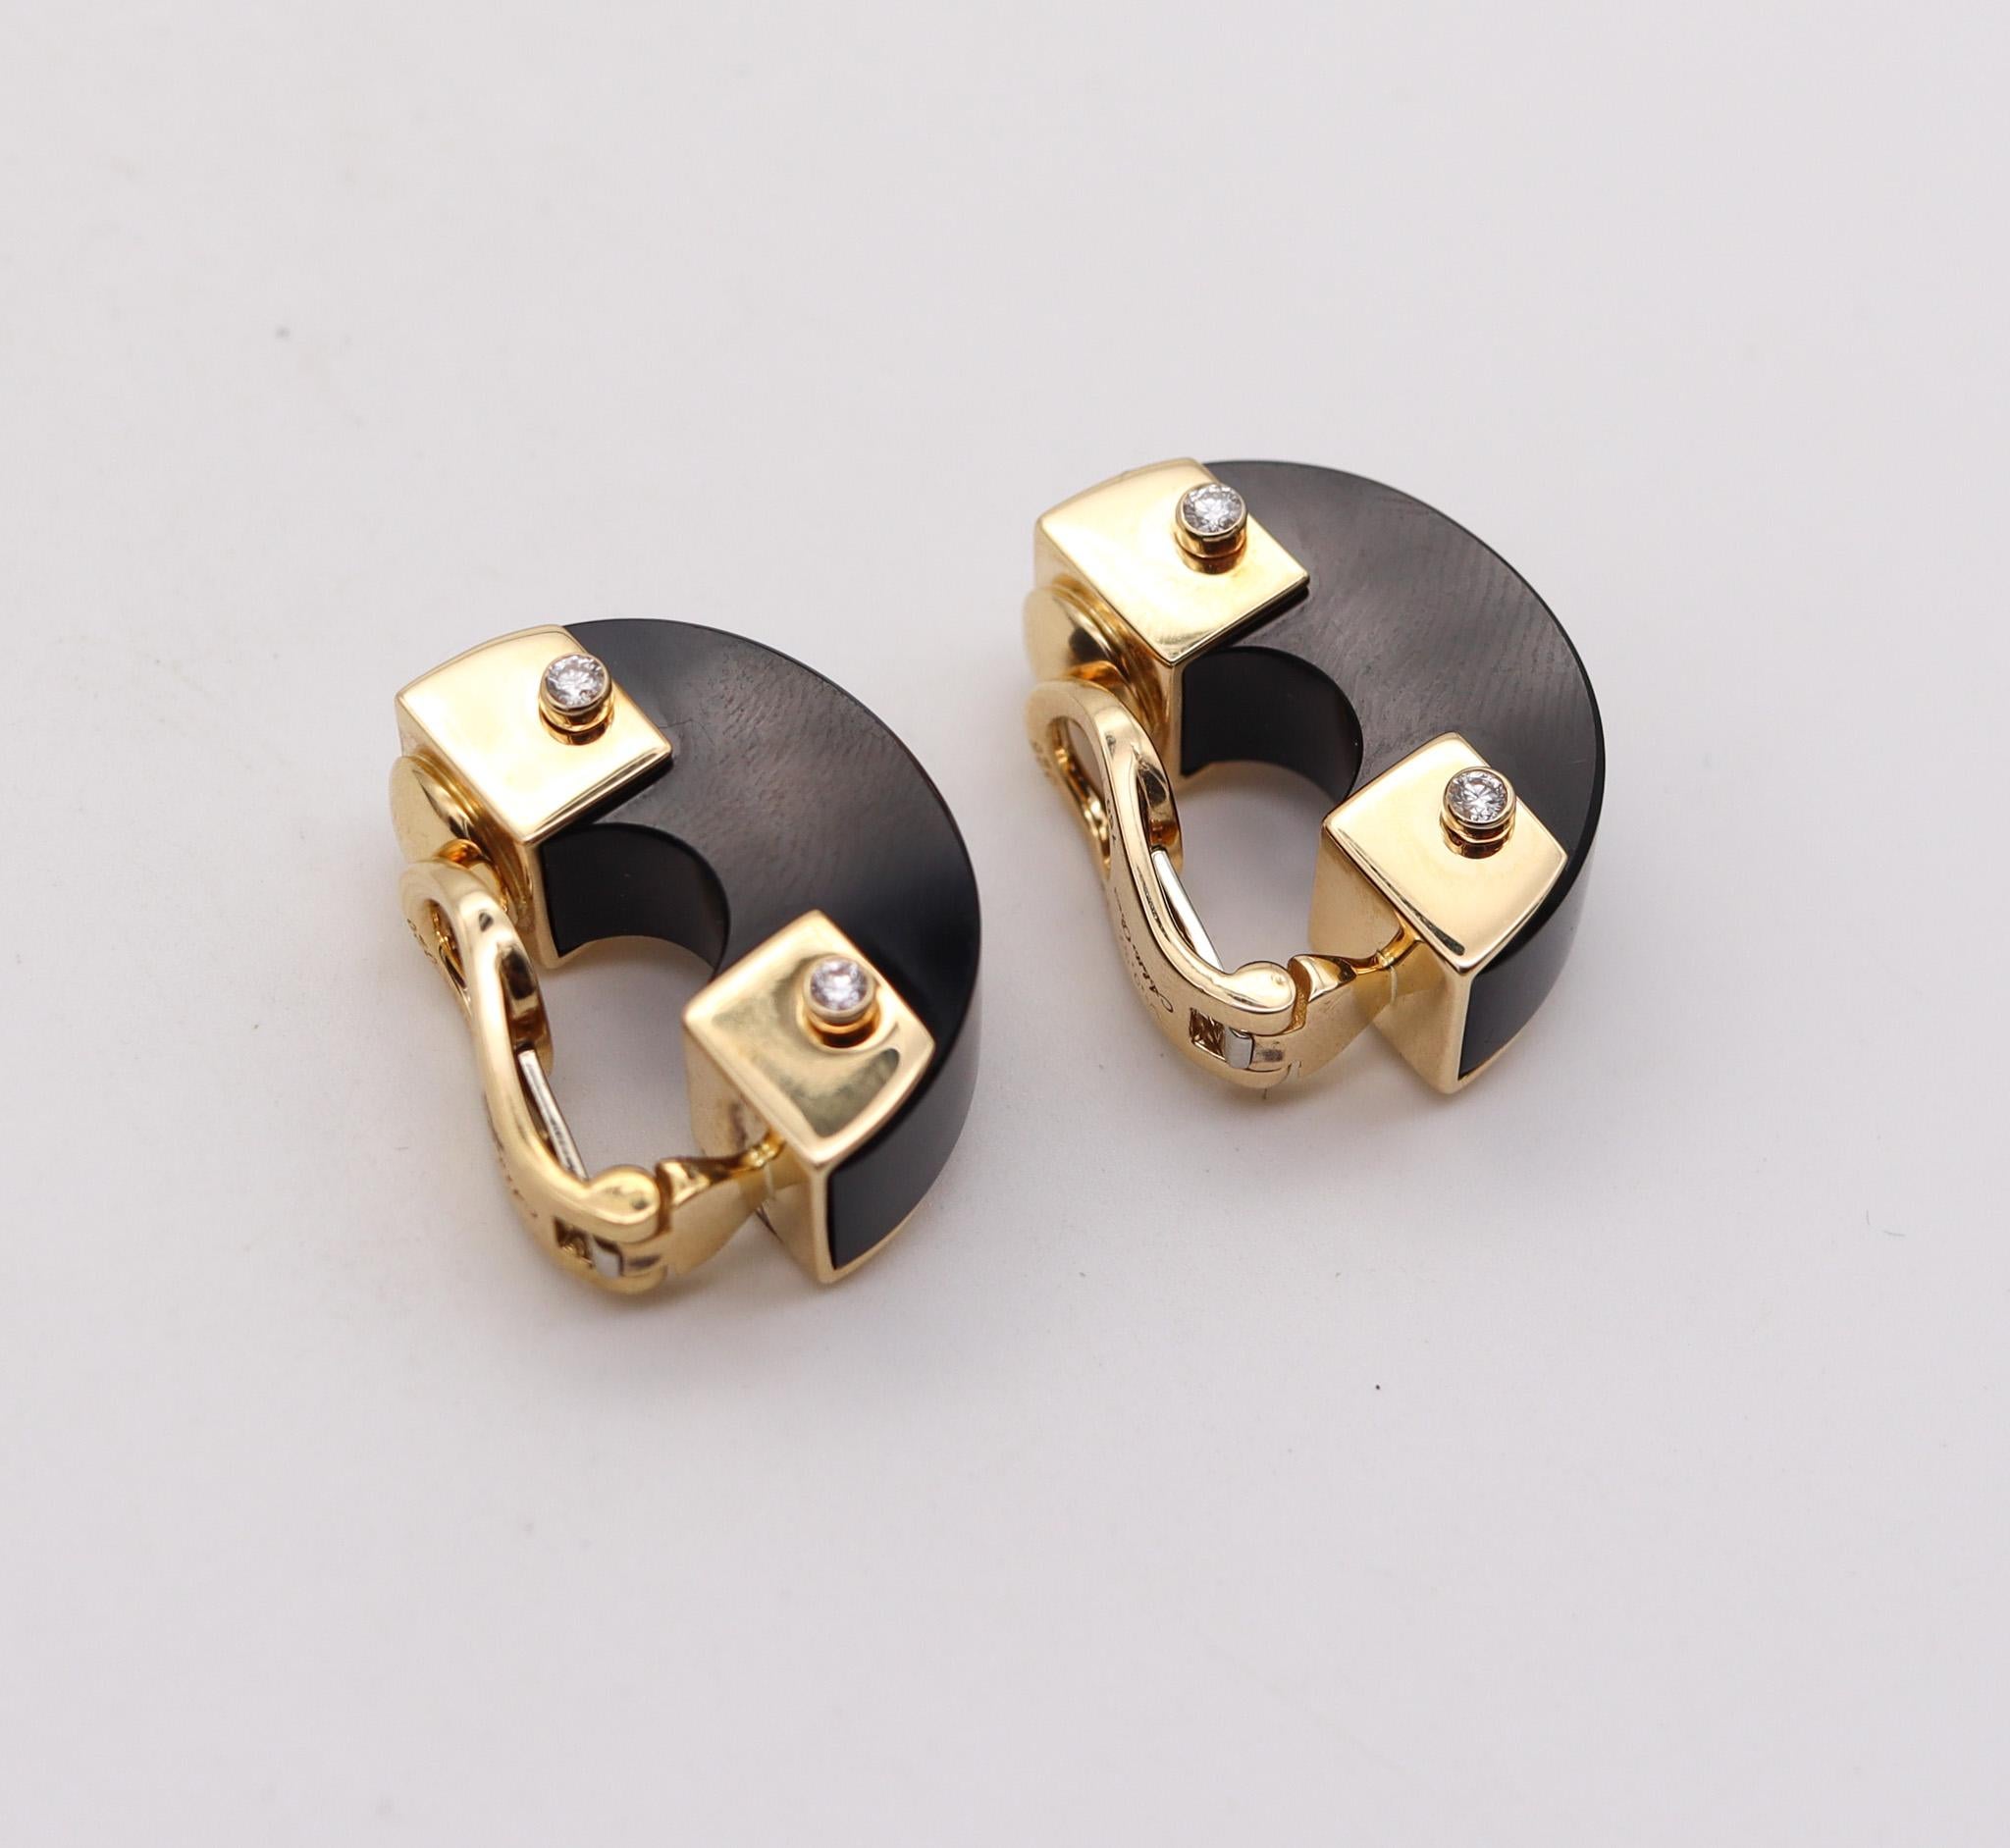 Aletto Brothers Geometric Earrings in 18kt Yellow Gold with Diamonds and Onyxes In Excellent Condition For Sale In Miami, FL